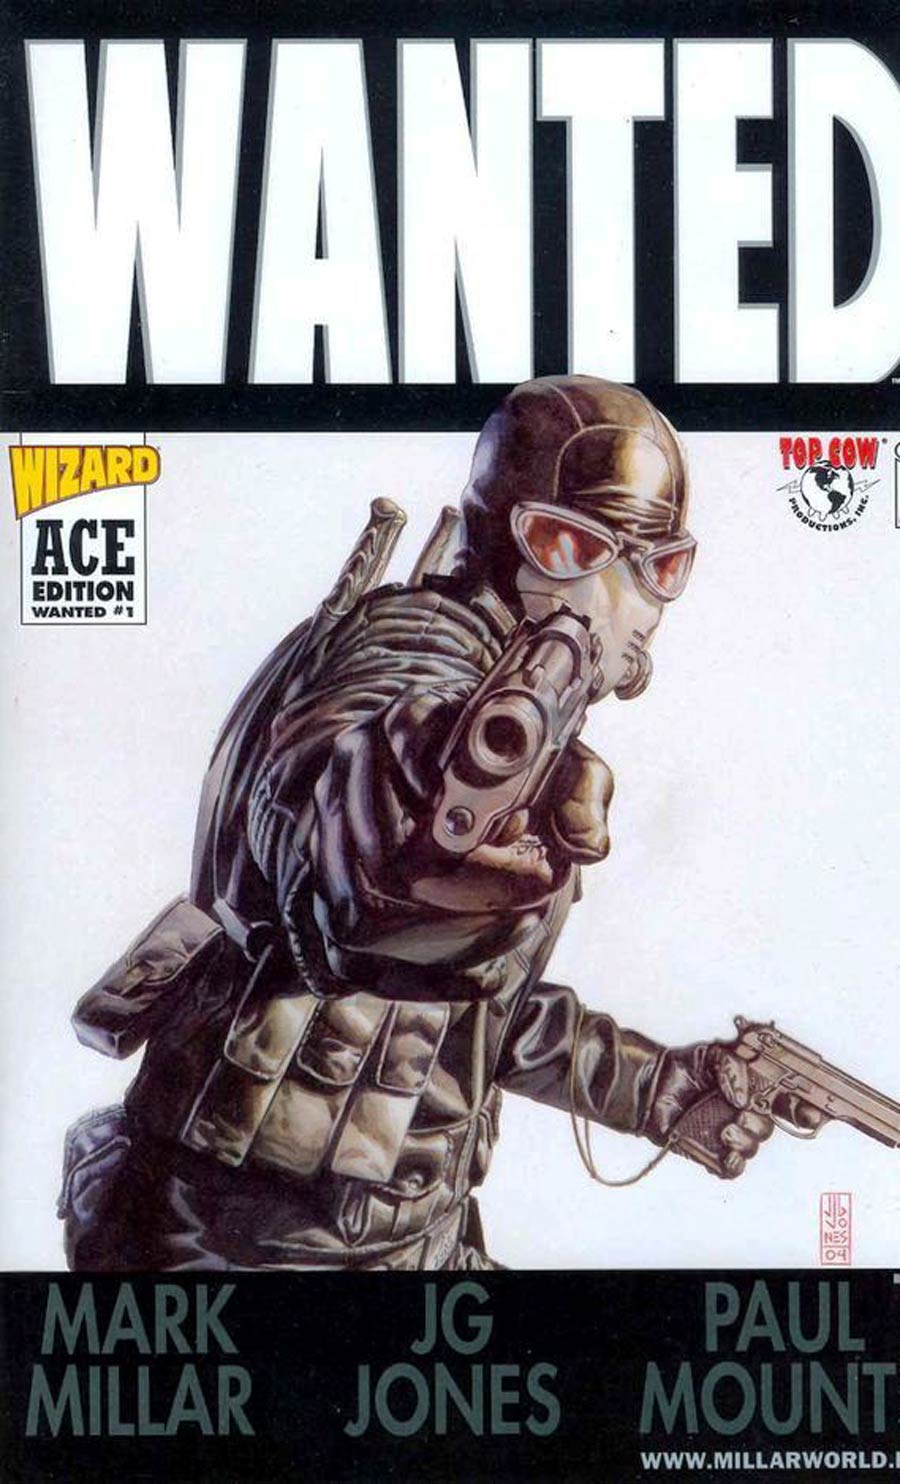 Wanted #1 Cover E Wizard Ace Edition